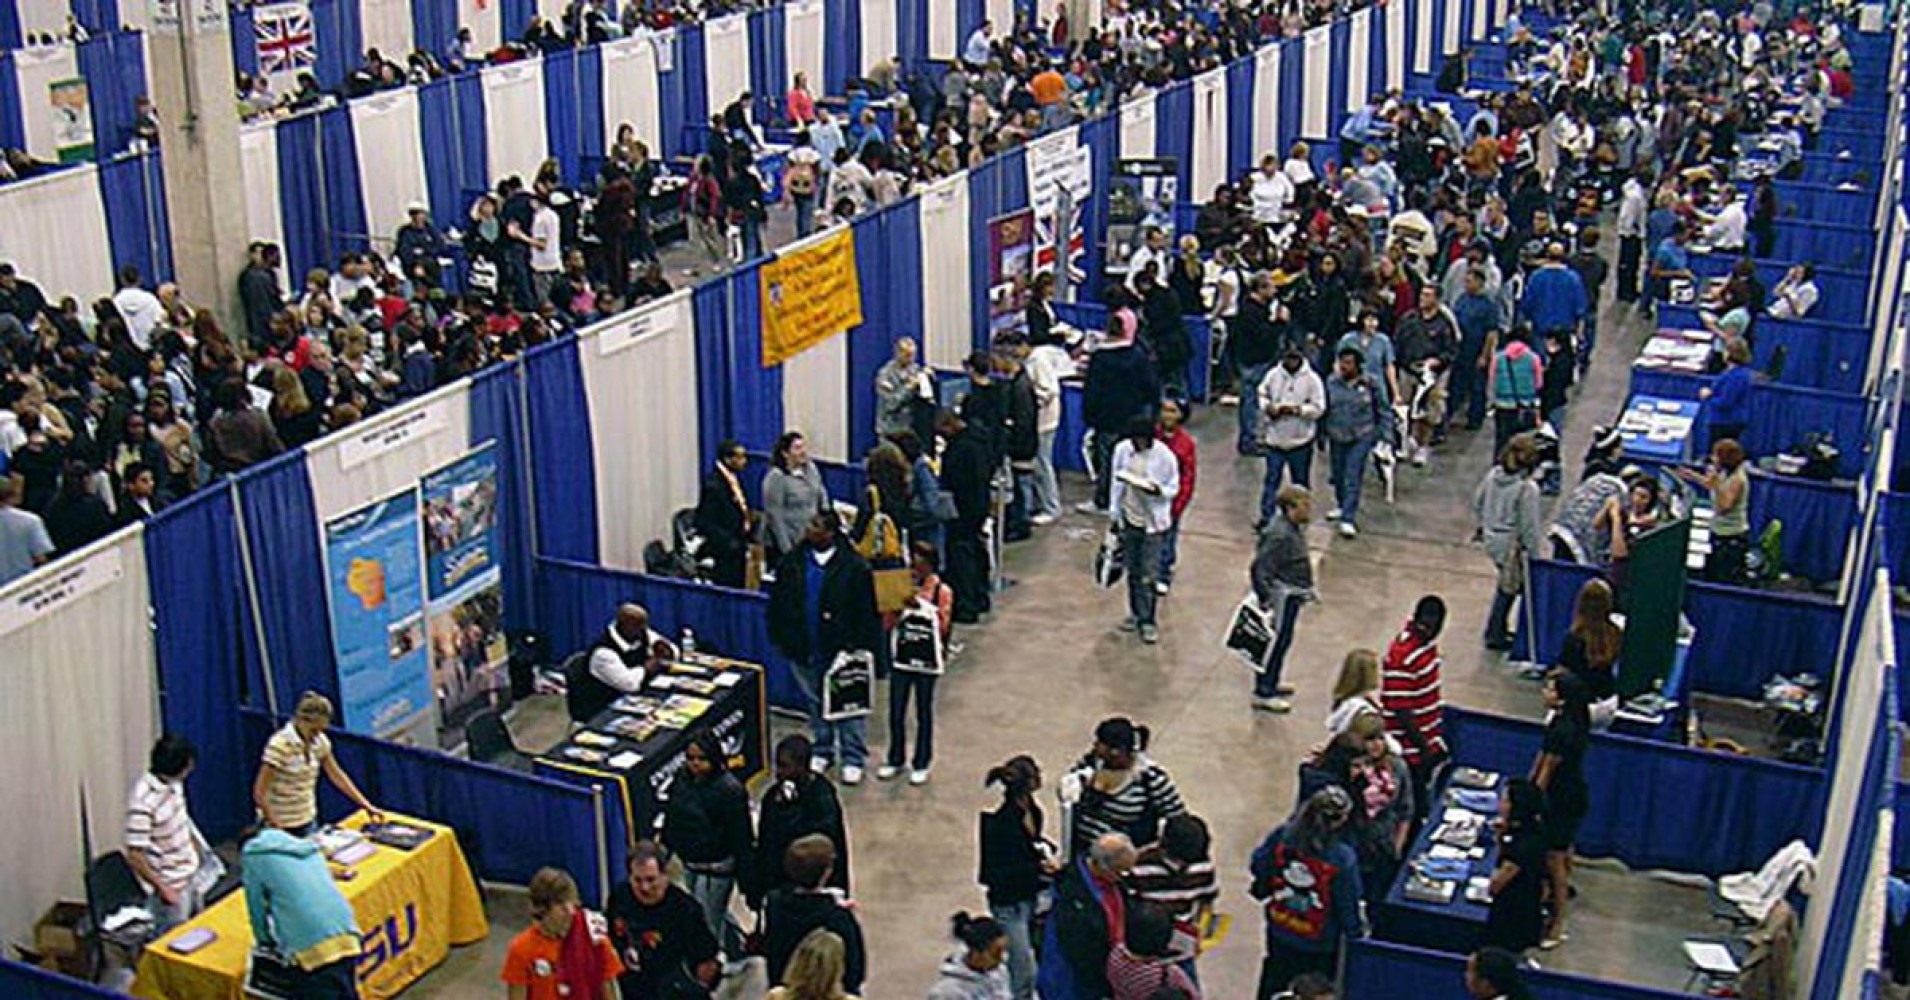 The Best Way to Start Your College Search? Attend a College Fair